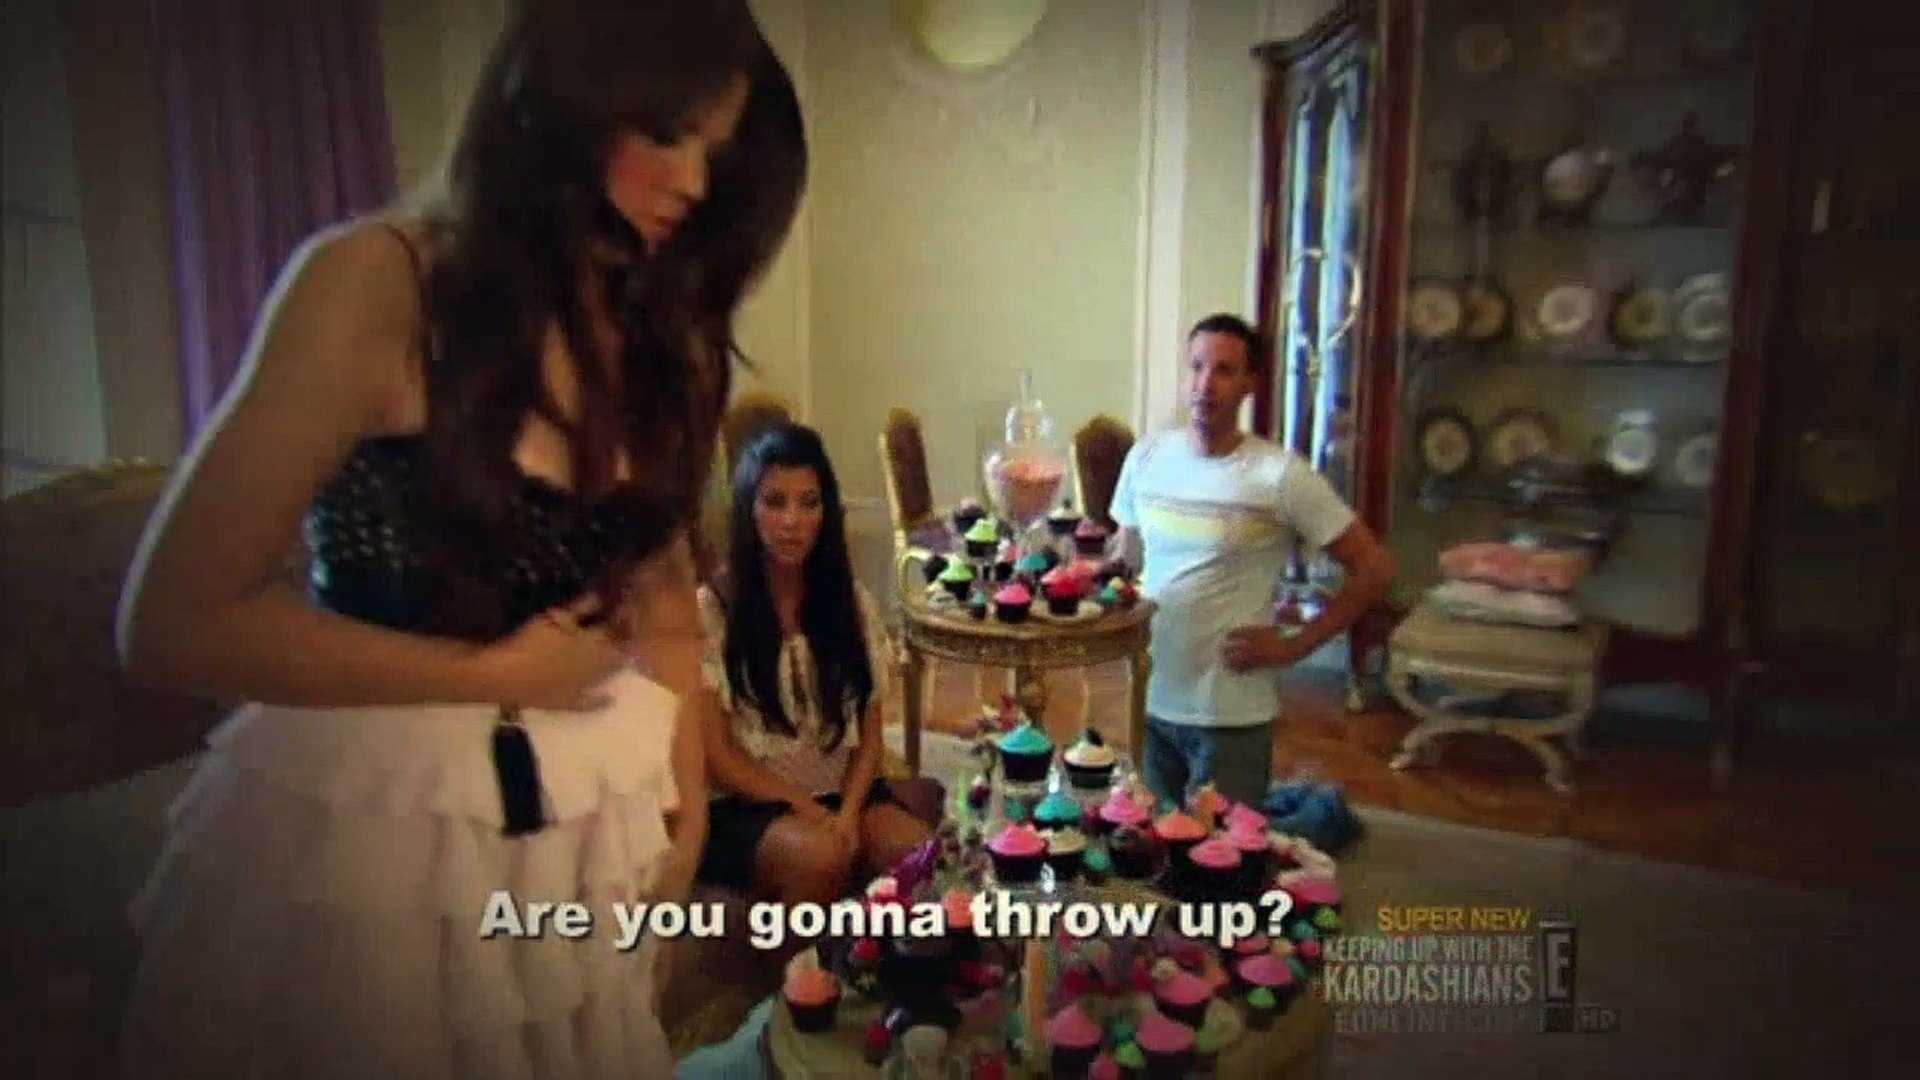 keeping up with the kardashians on dailymotion